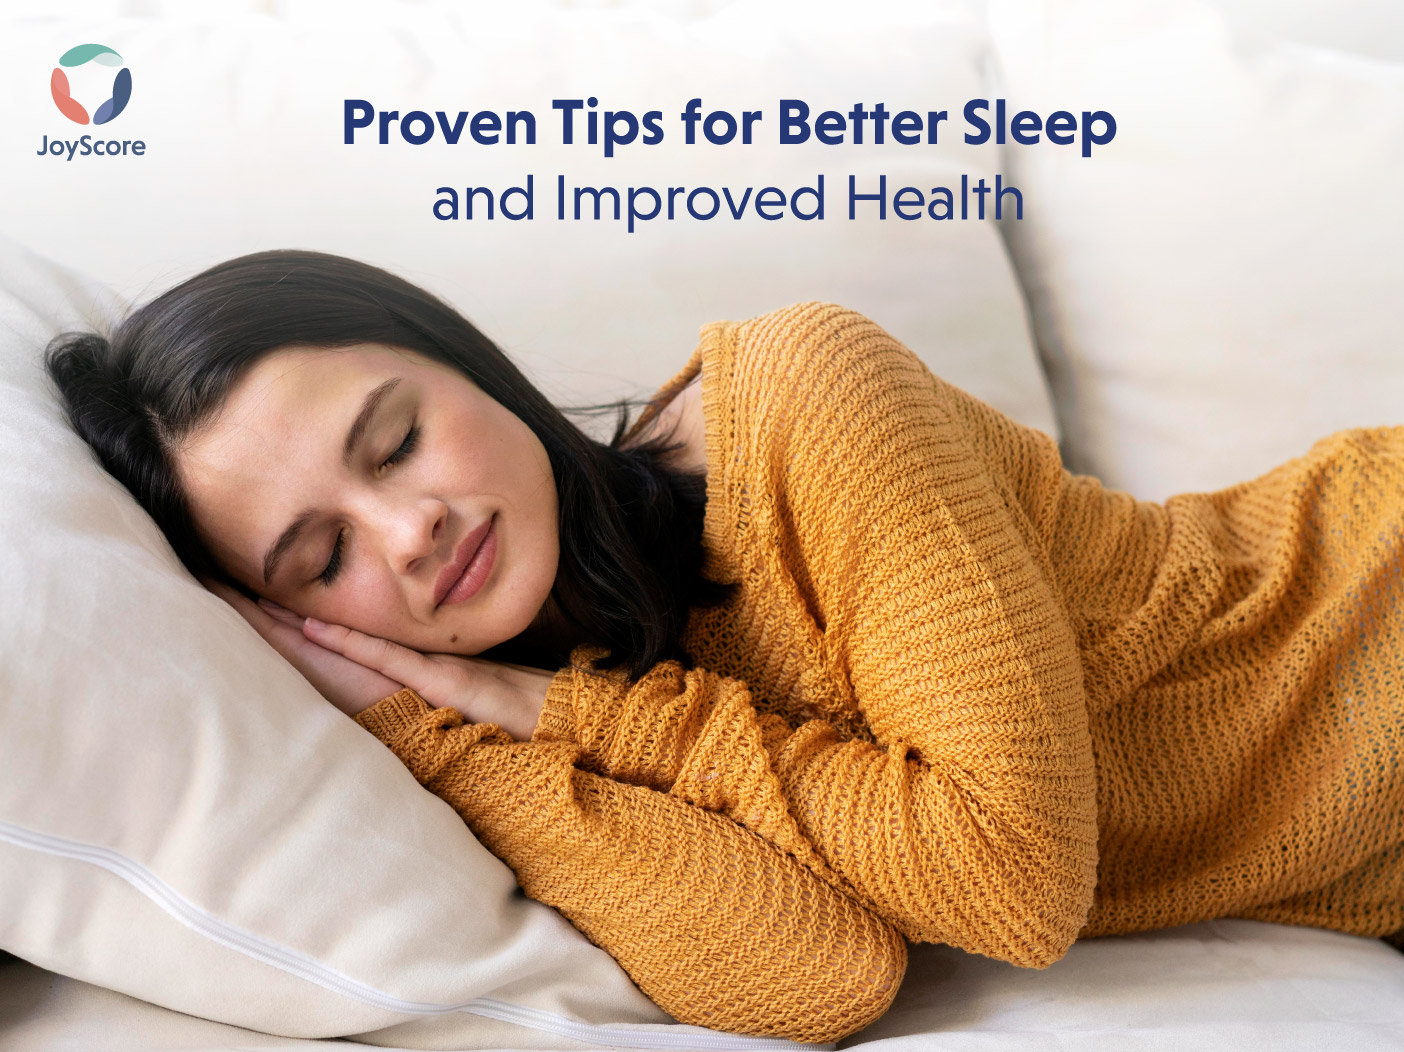 Proven Tips for Better Sleep and Improved Health